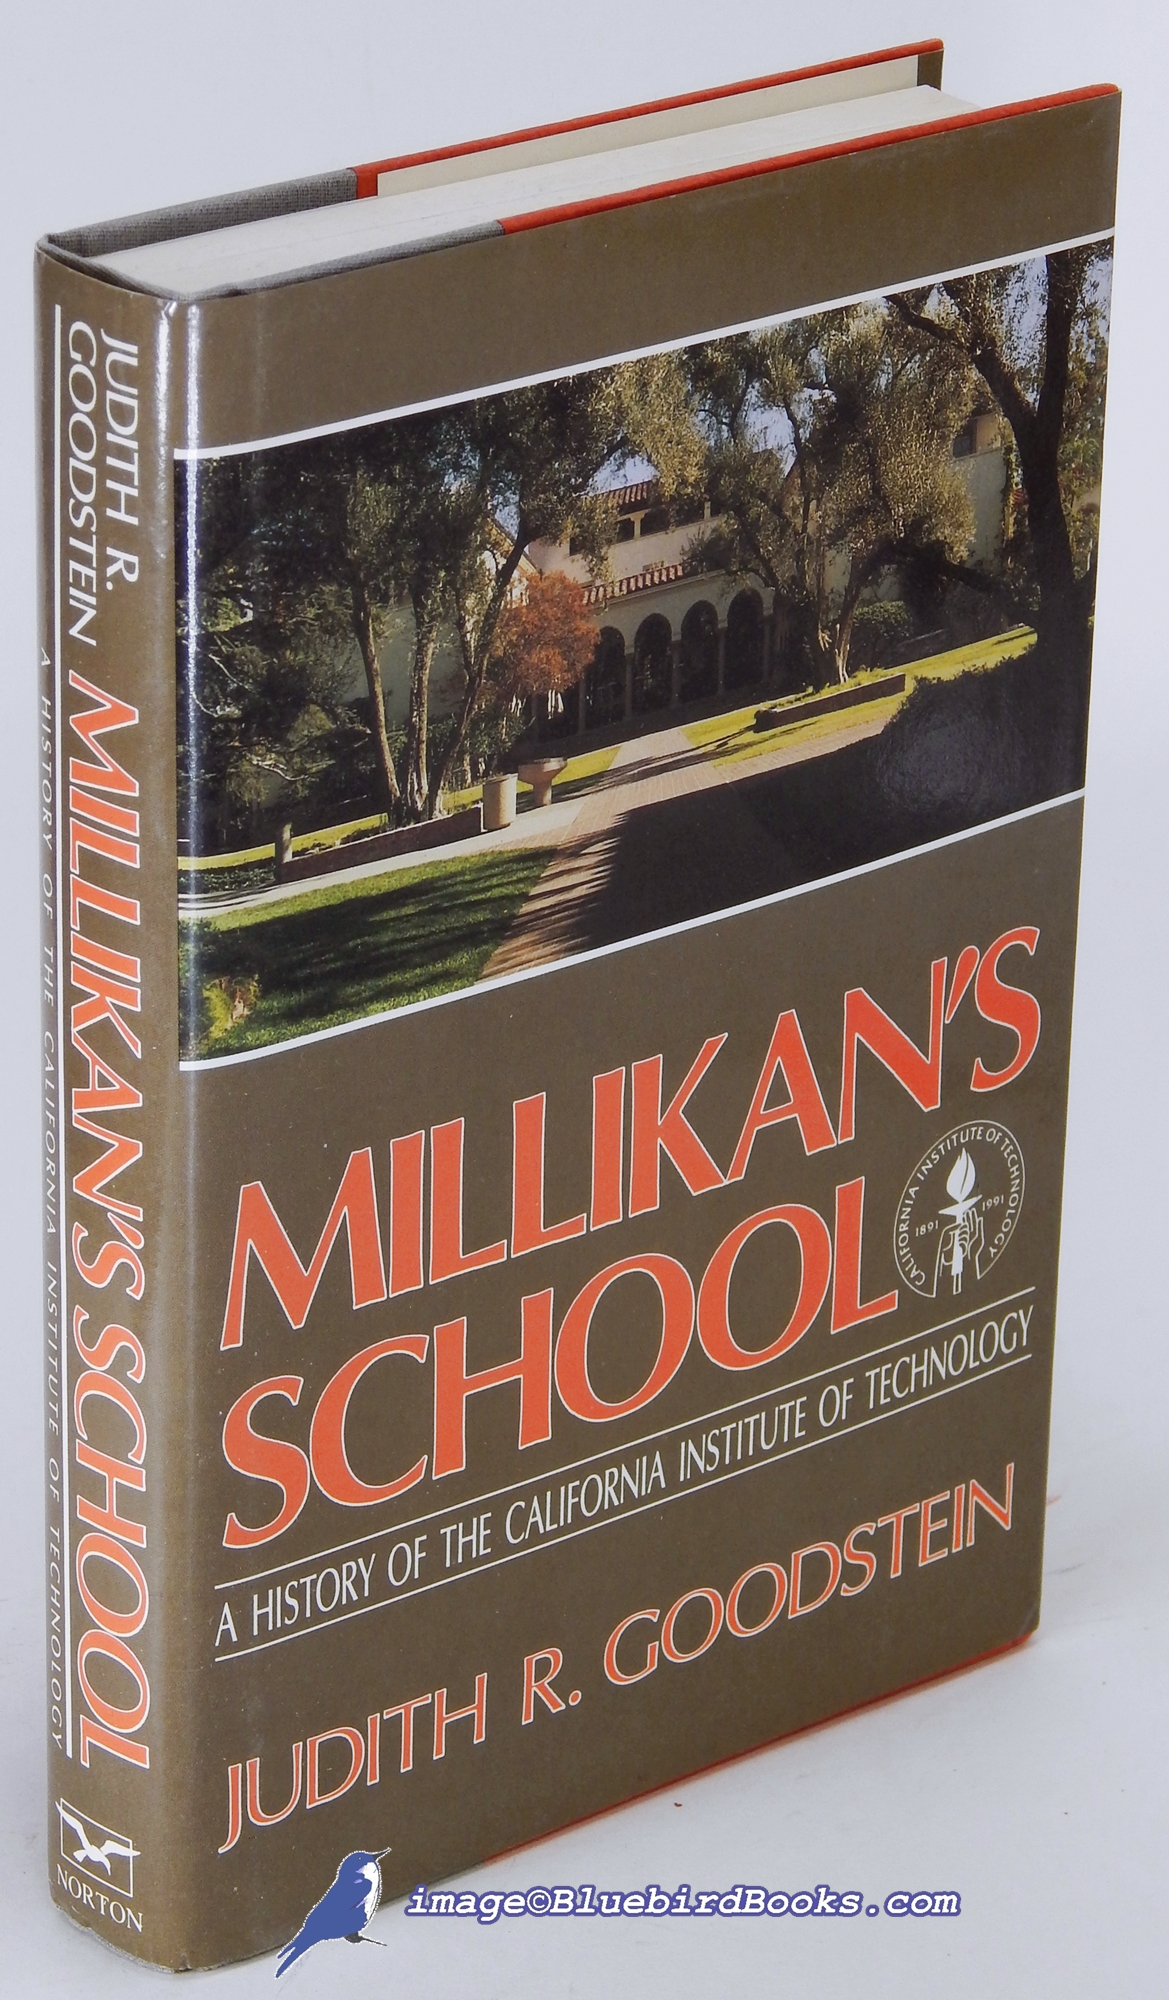 GOODSTEIN, JUDITH R. - Millikan's School: A History of the California Institute of Technology [Caltech]